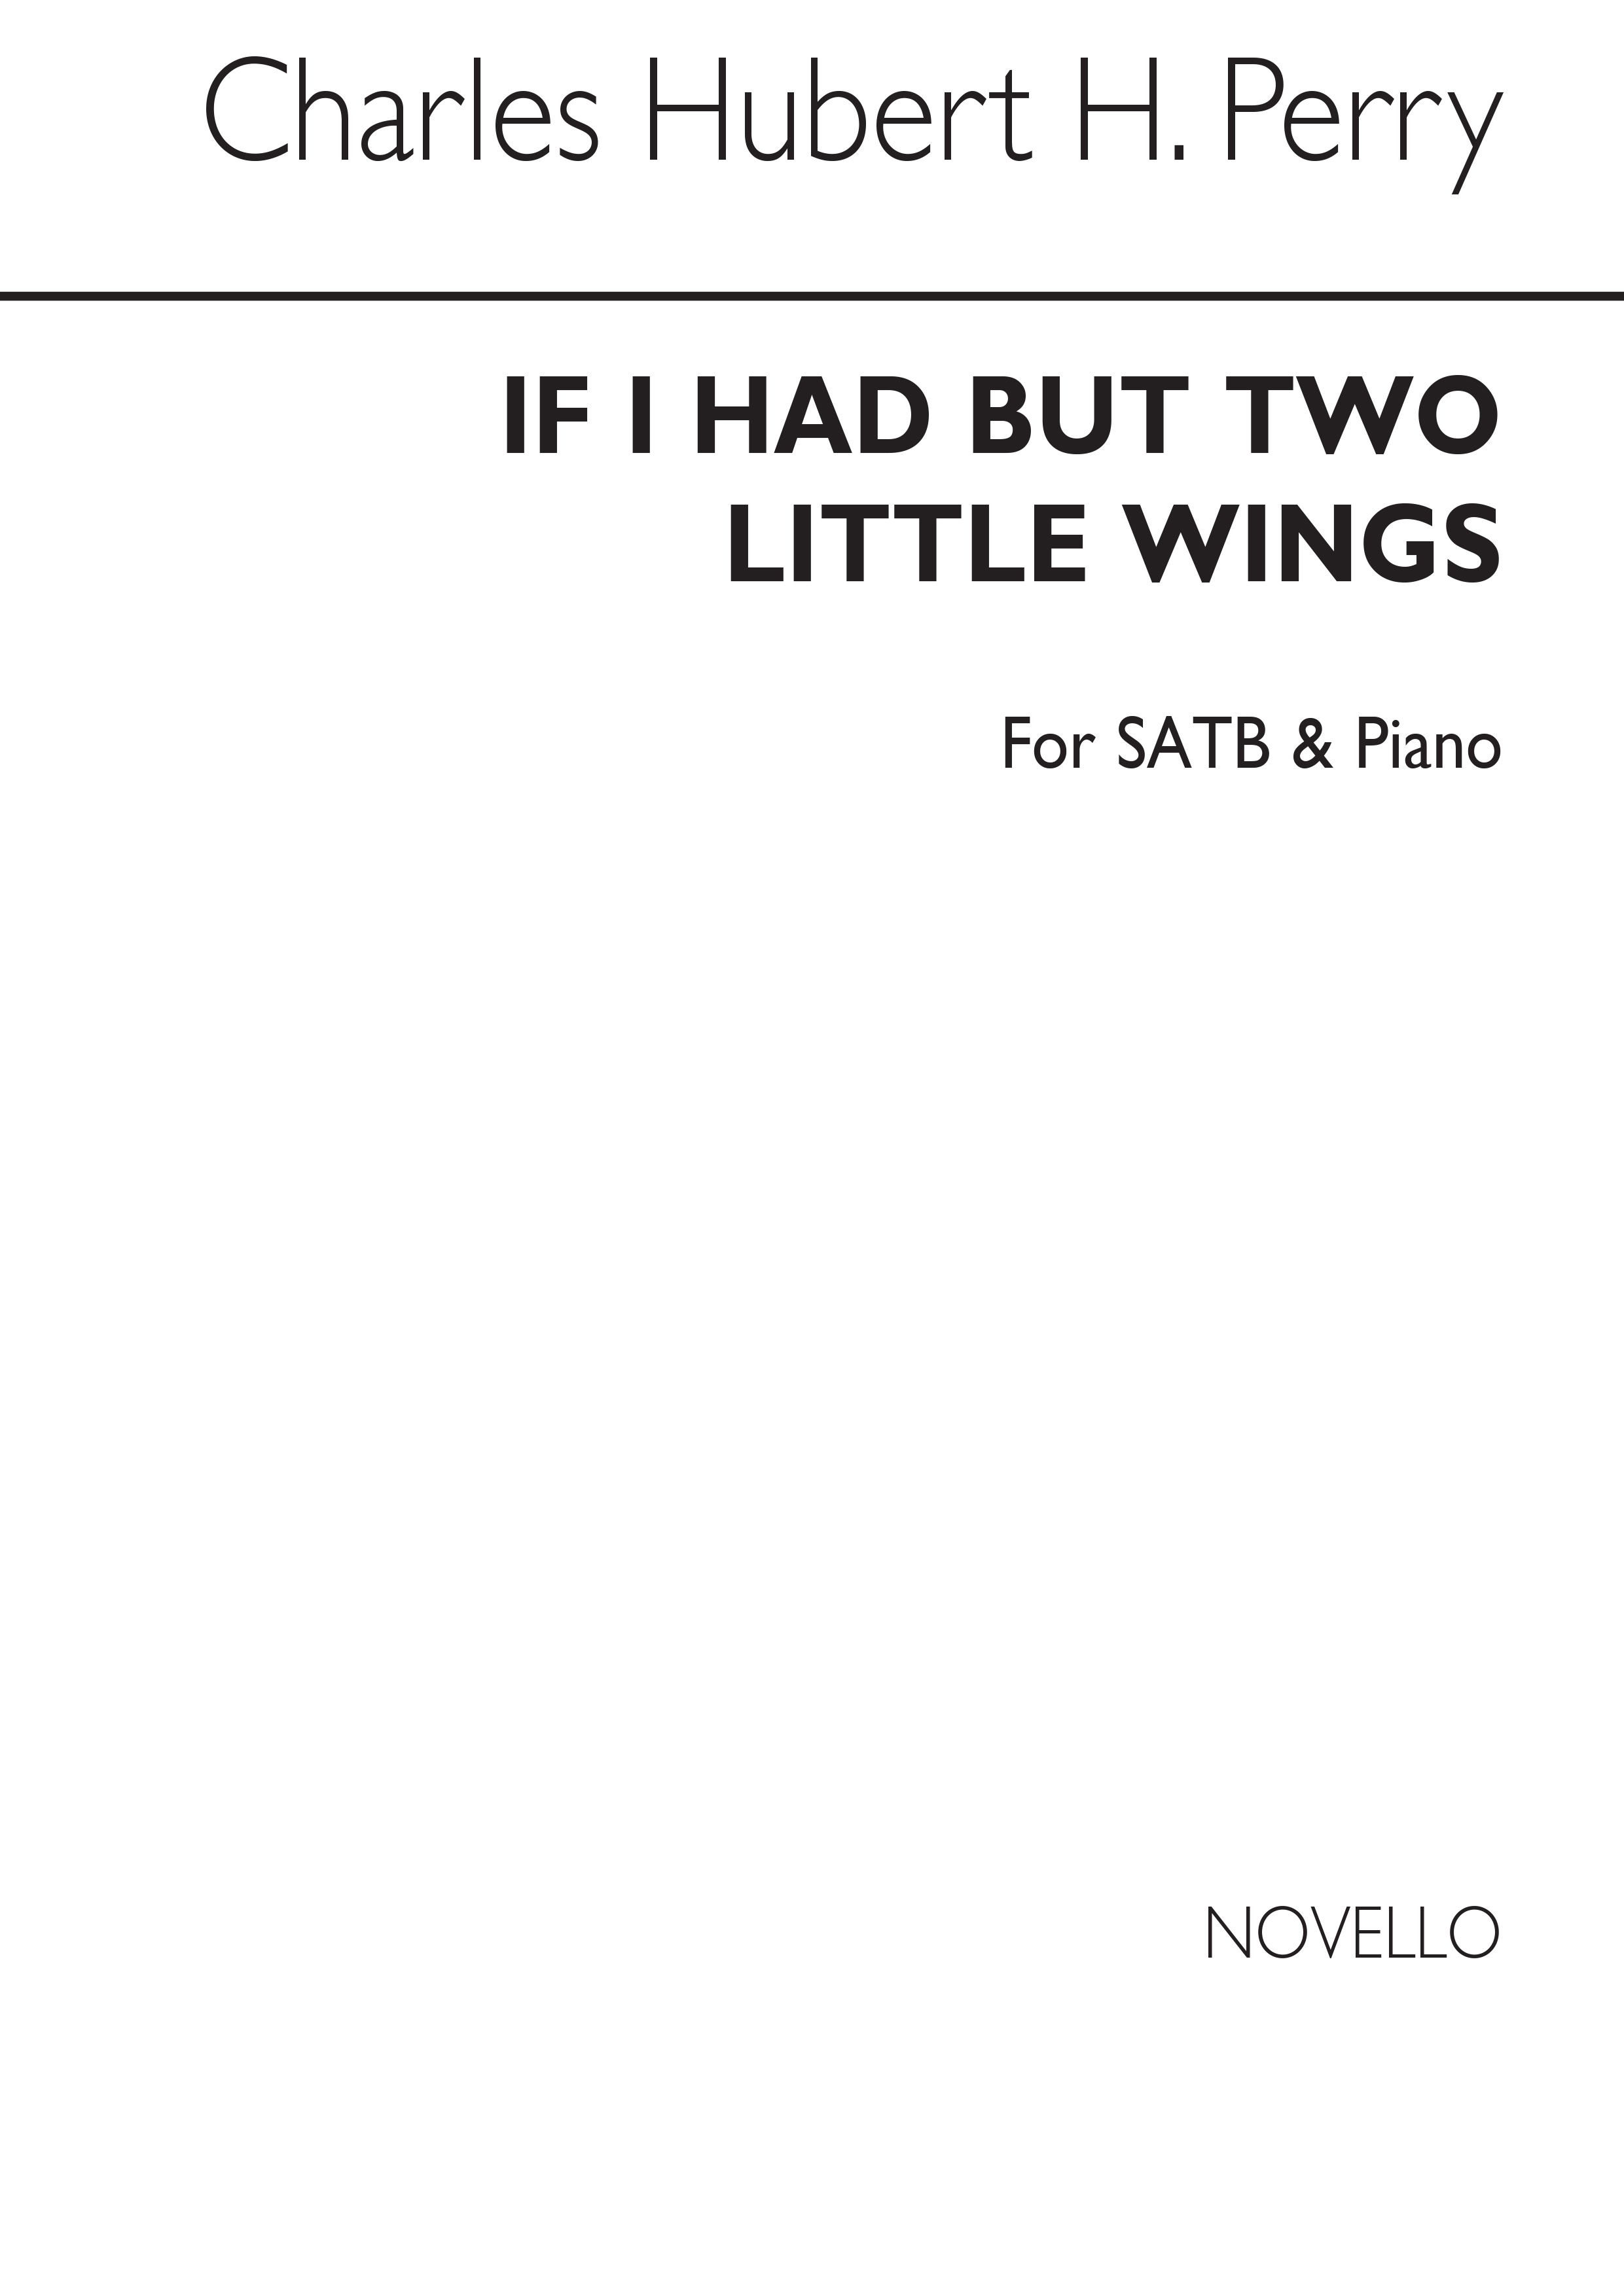 C. Hubert. H. Parry: If I Had But Two Little Wings Satb/Piano